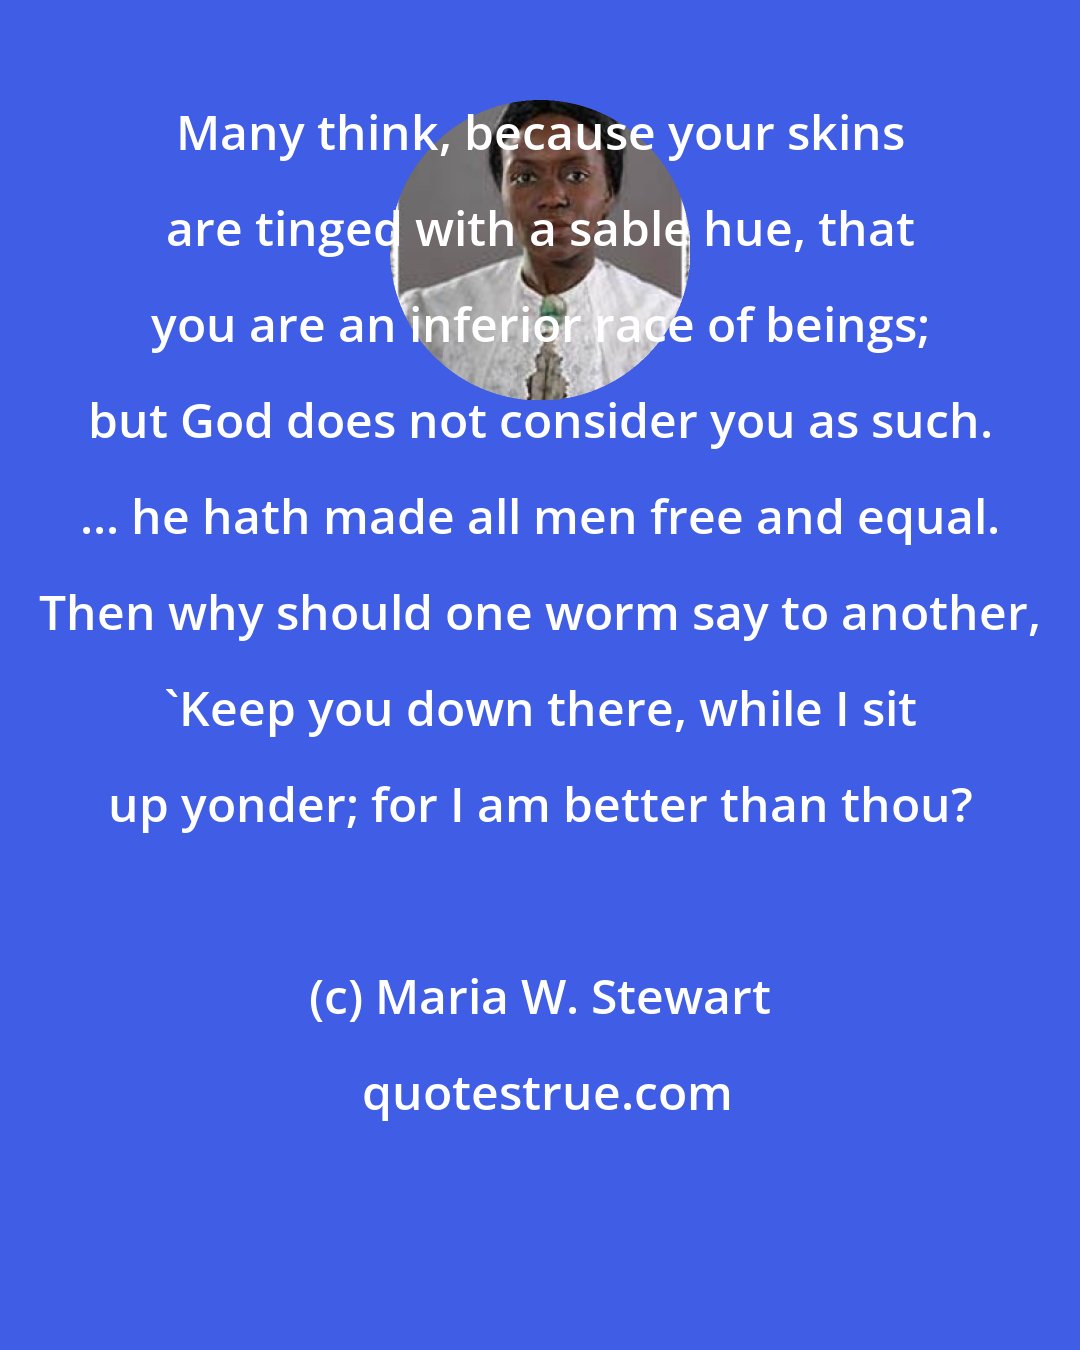 Maria W. Stewart: Many think, because your skins are tinged with a sable hue, that you are an inferior race of beings; but God does not consider you as such. ... he hath made all men free and equal. Then why should one worm say to another, 'Keep you down there, while I sit up yonder; for I am better than thou?